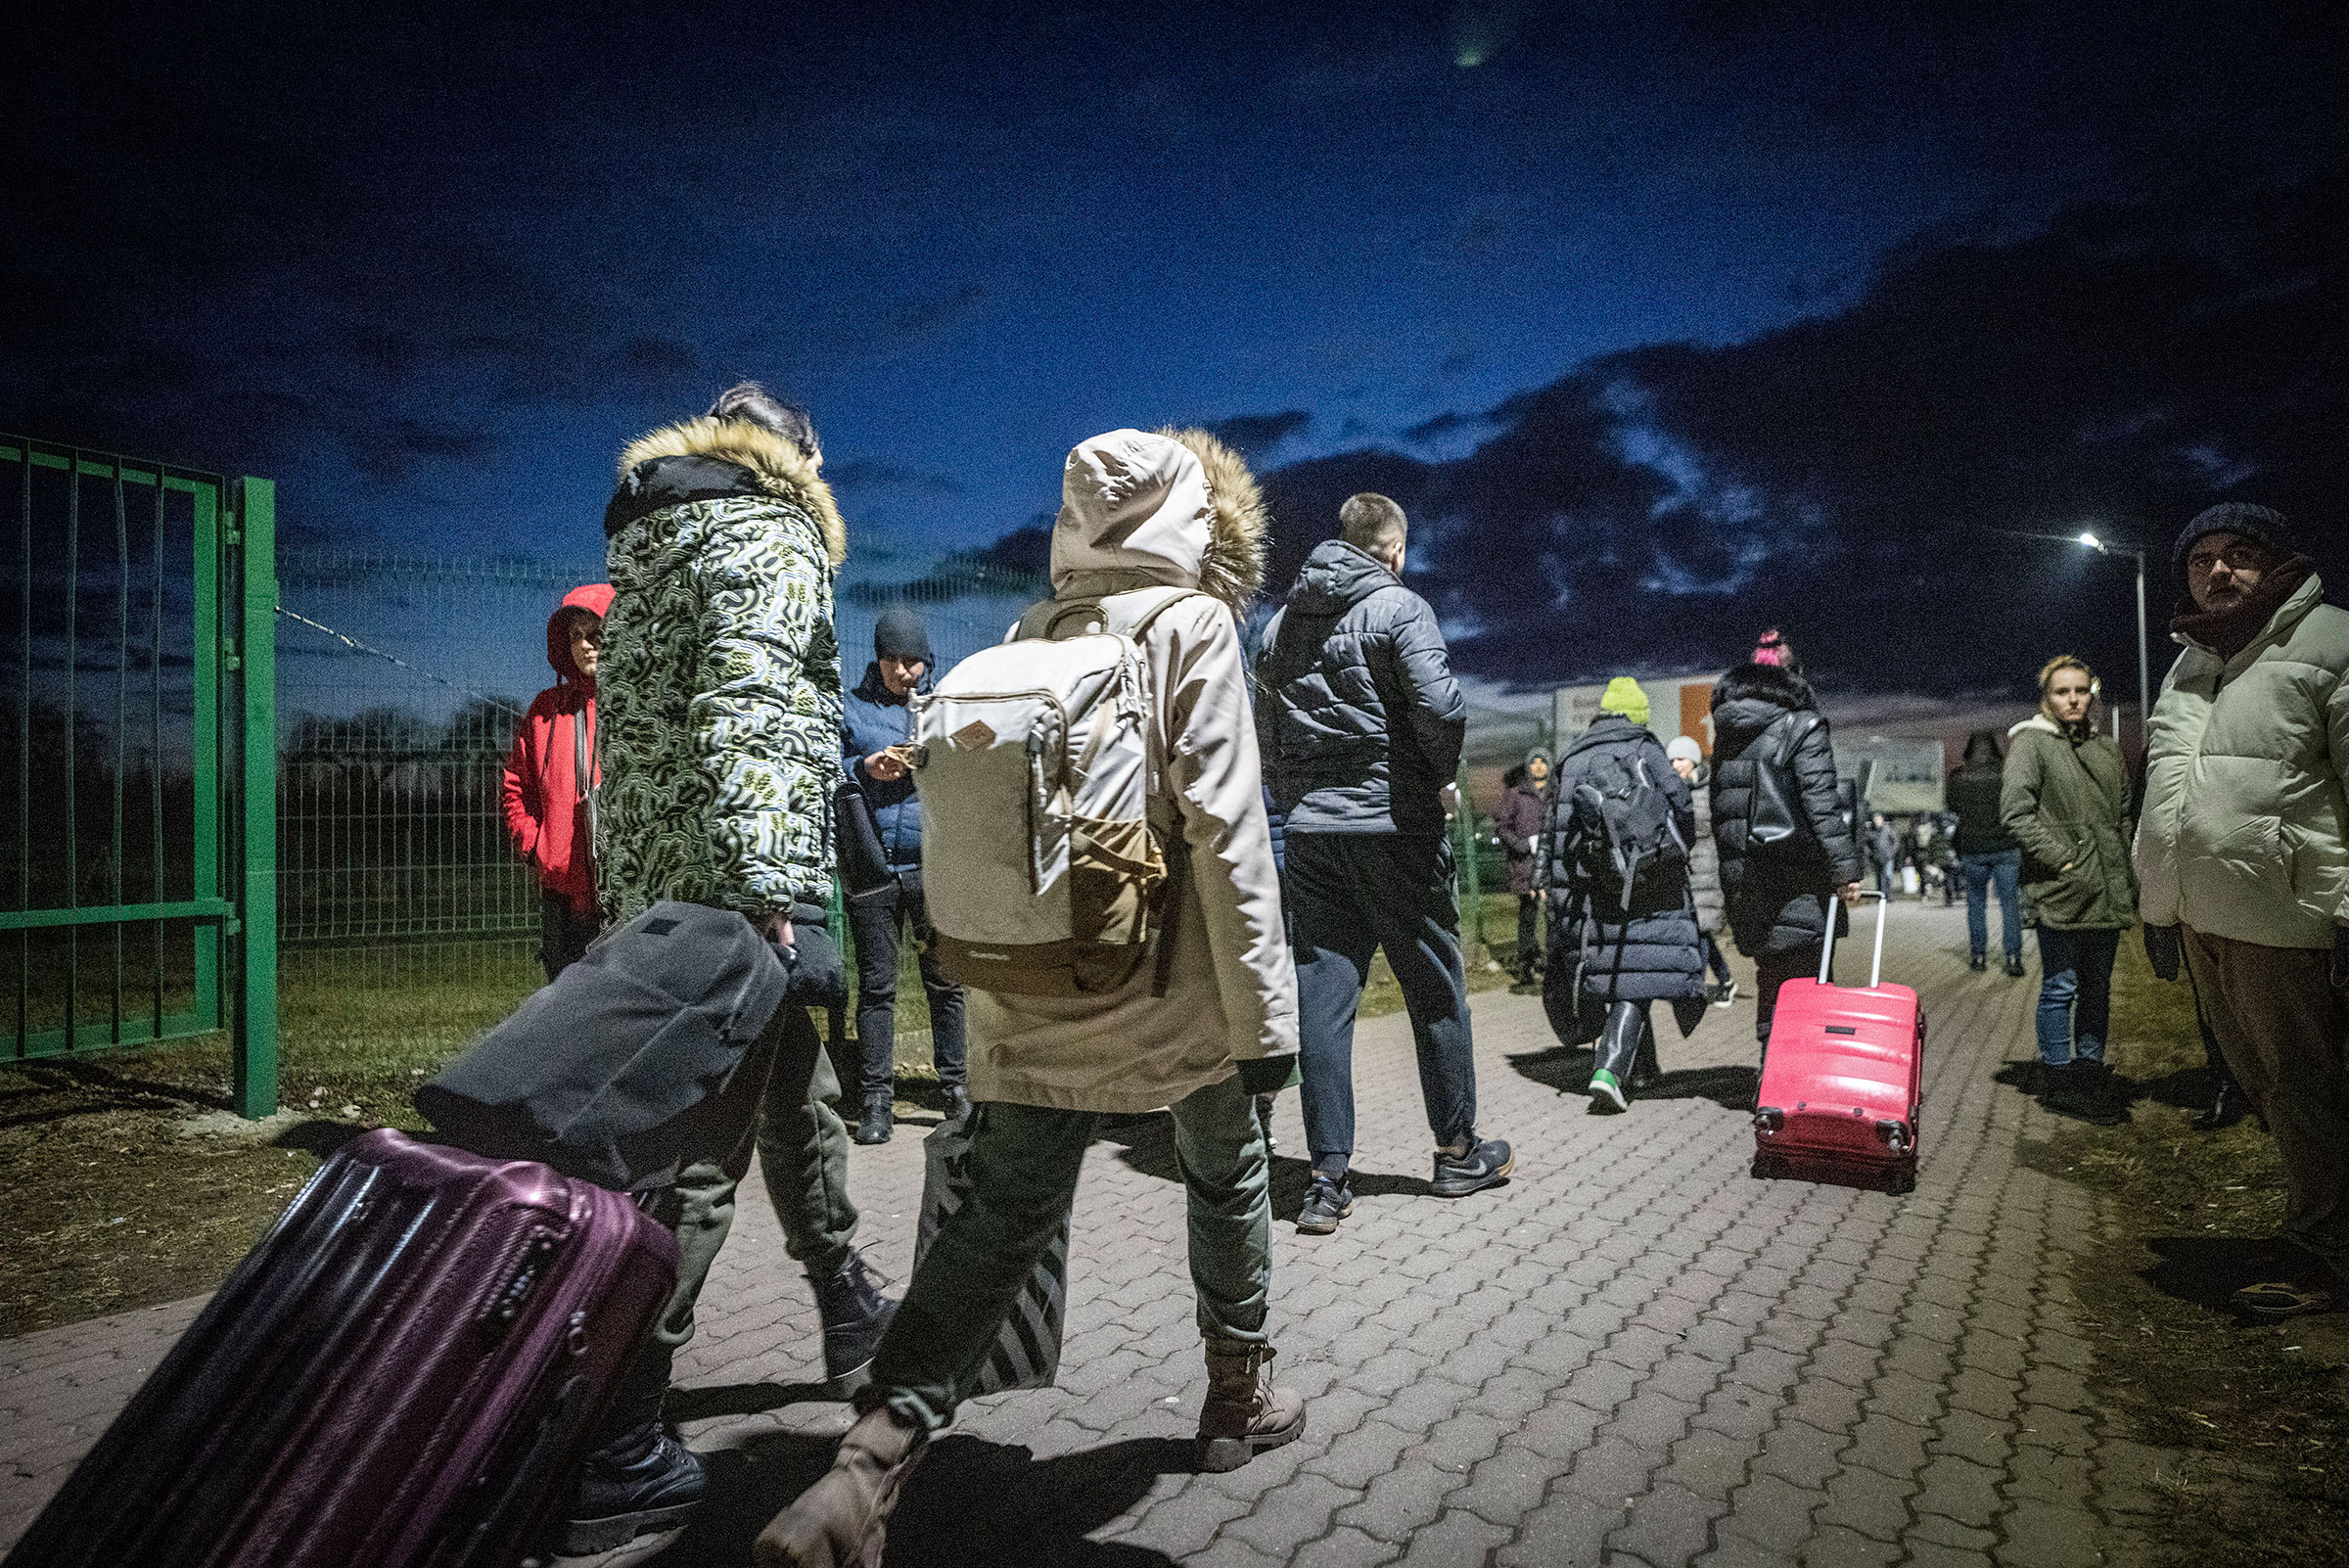 Refugees from Ukraine arrive in Medyka, Poland after crossing the border from Shehyni, Ukraine on Feb. 25, 2022.